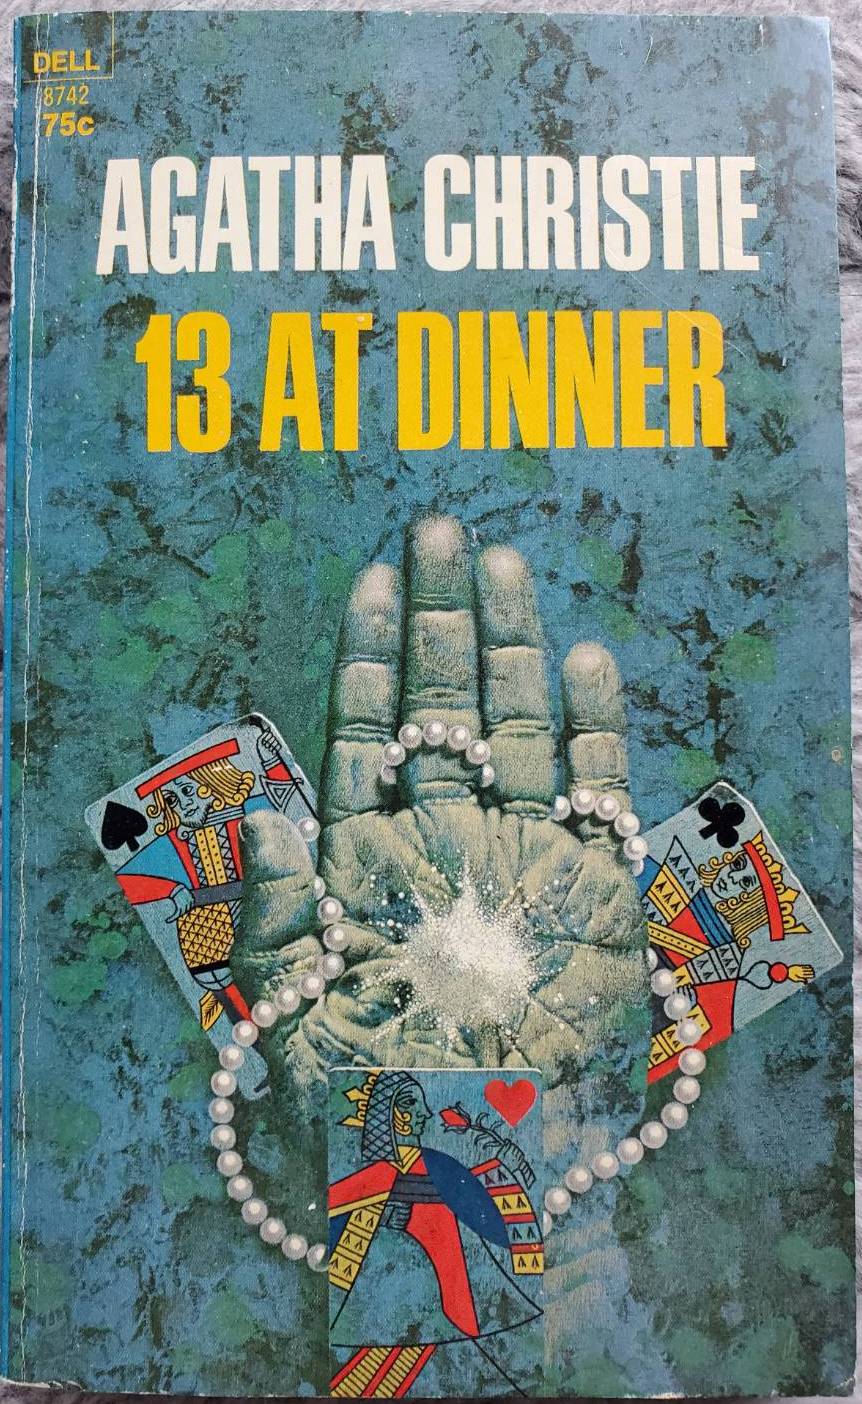 13 at dinner cover